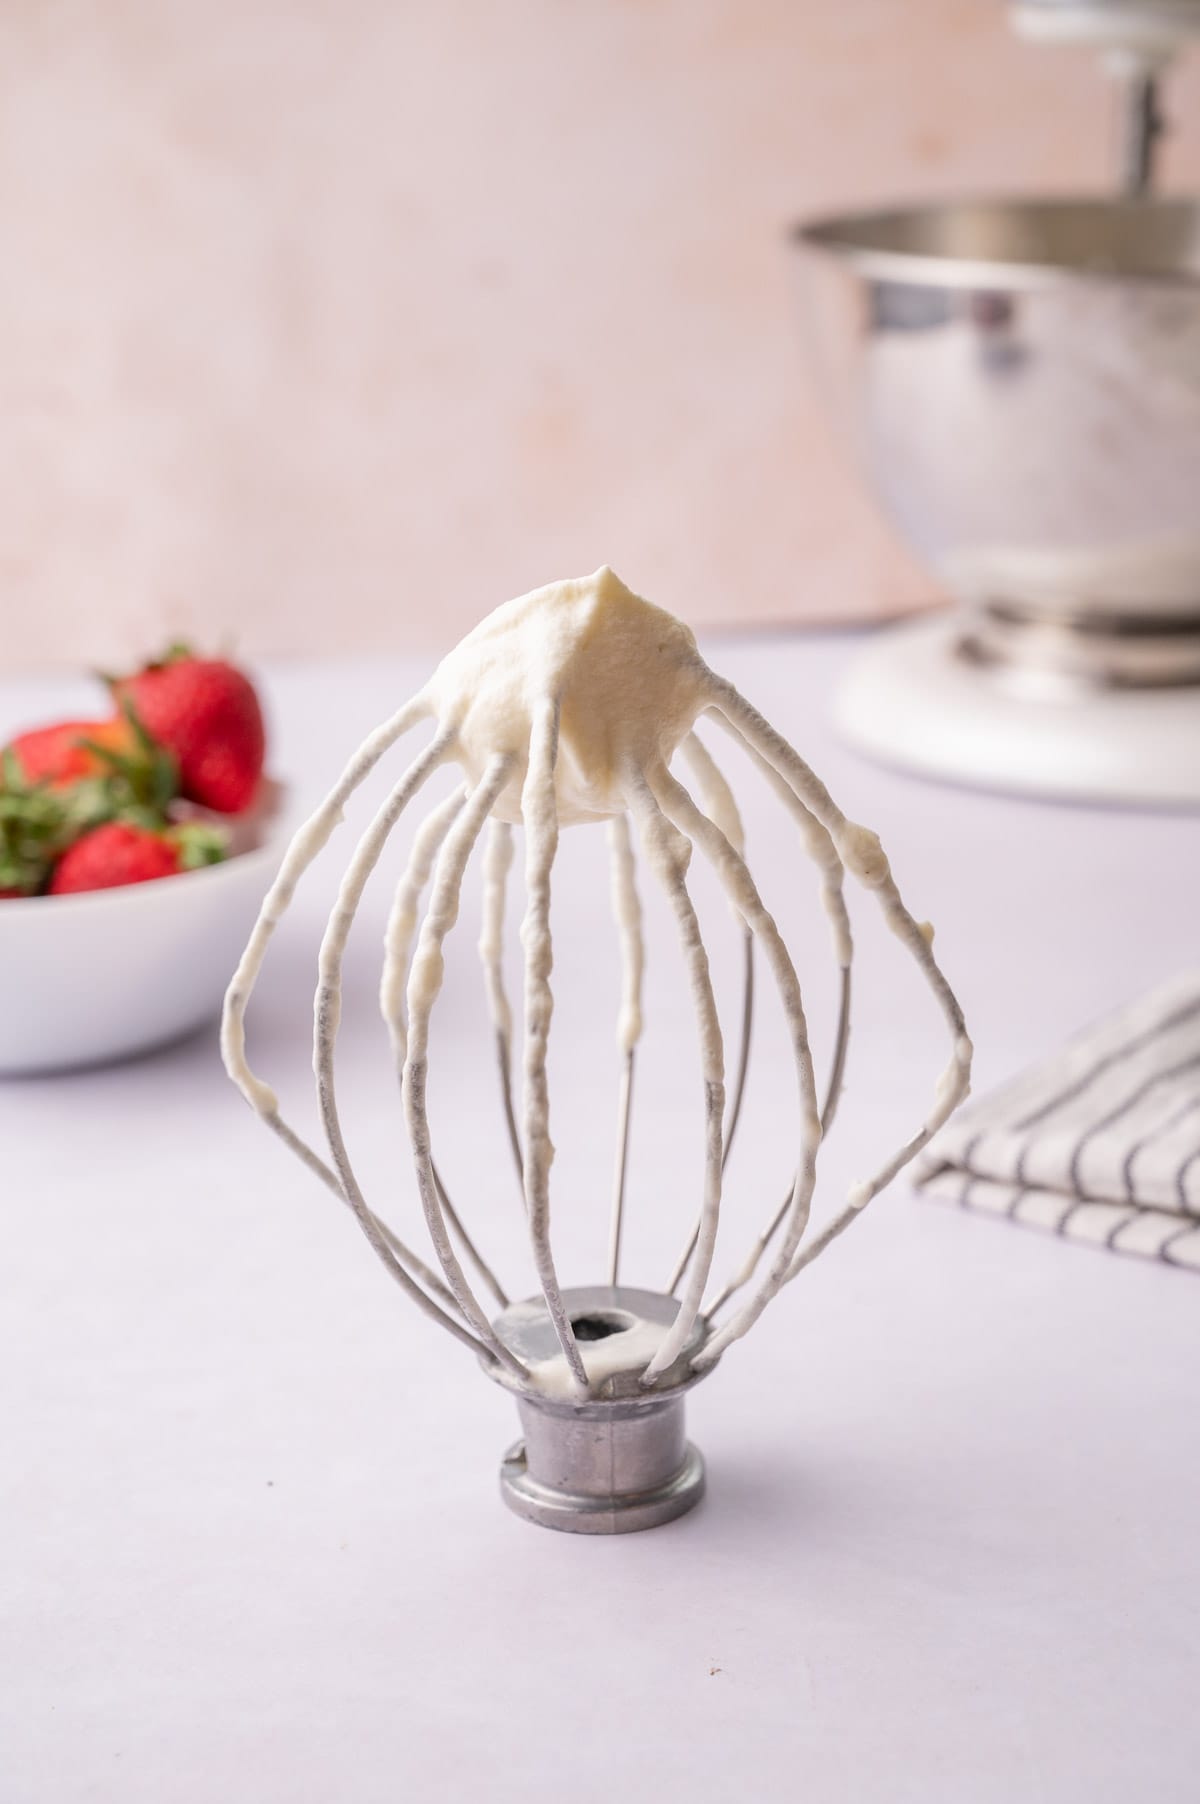 A mixer beater with whipped cream. Strawberries and a mixer in the background.